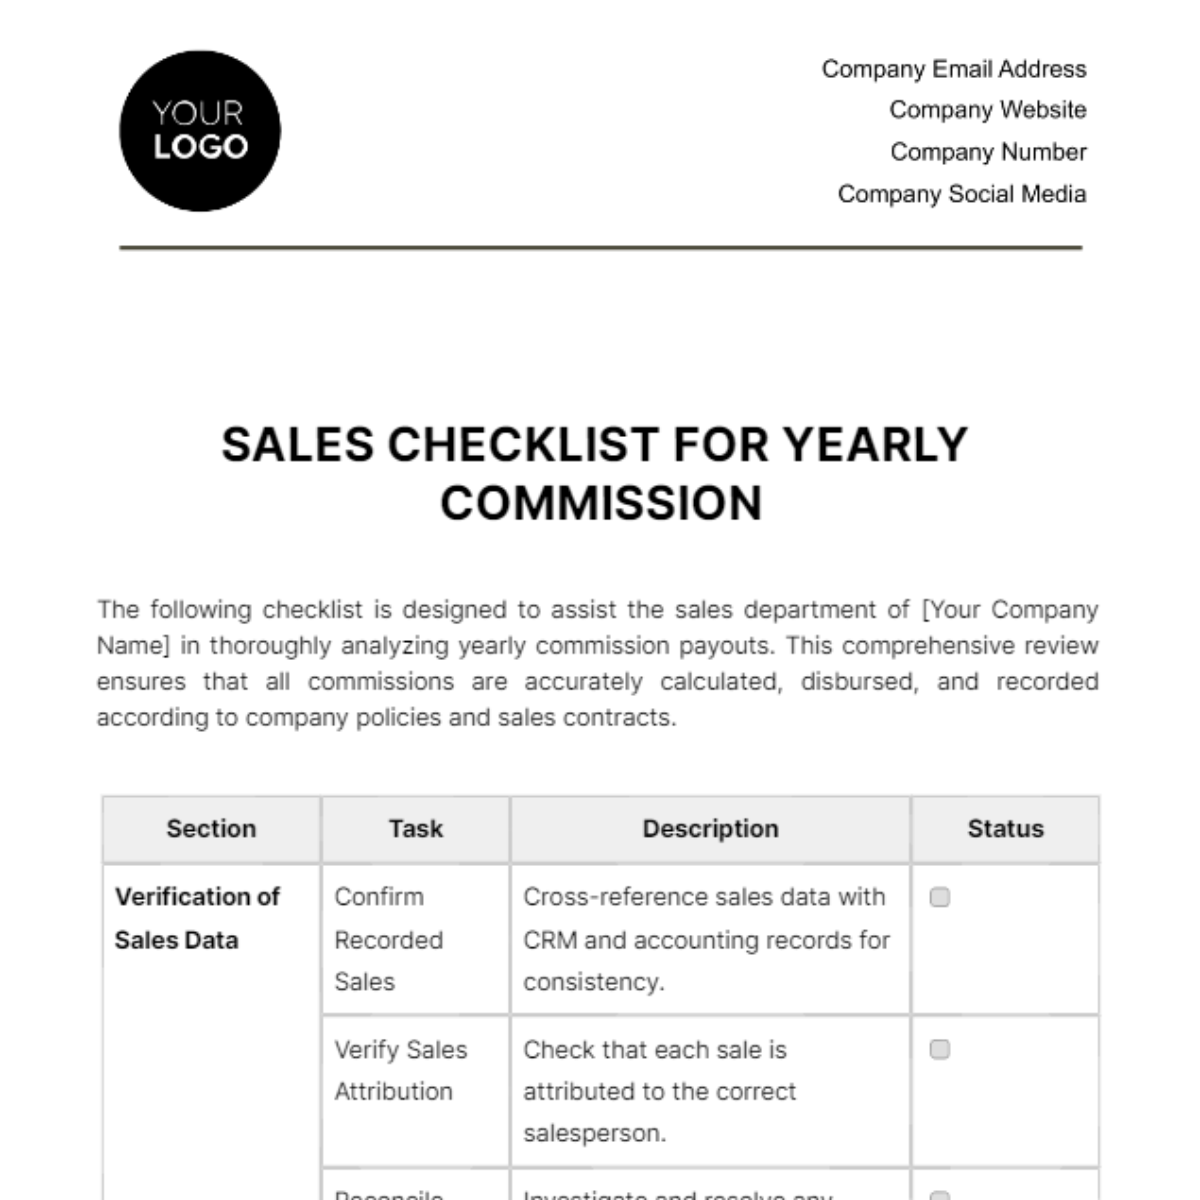 Sales Checklist for Yearly Commission Analysis Template